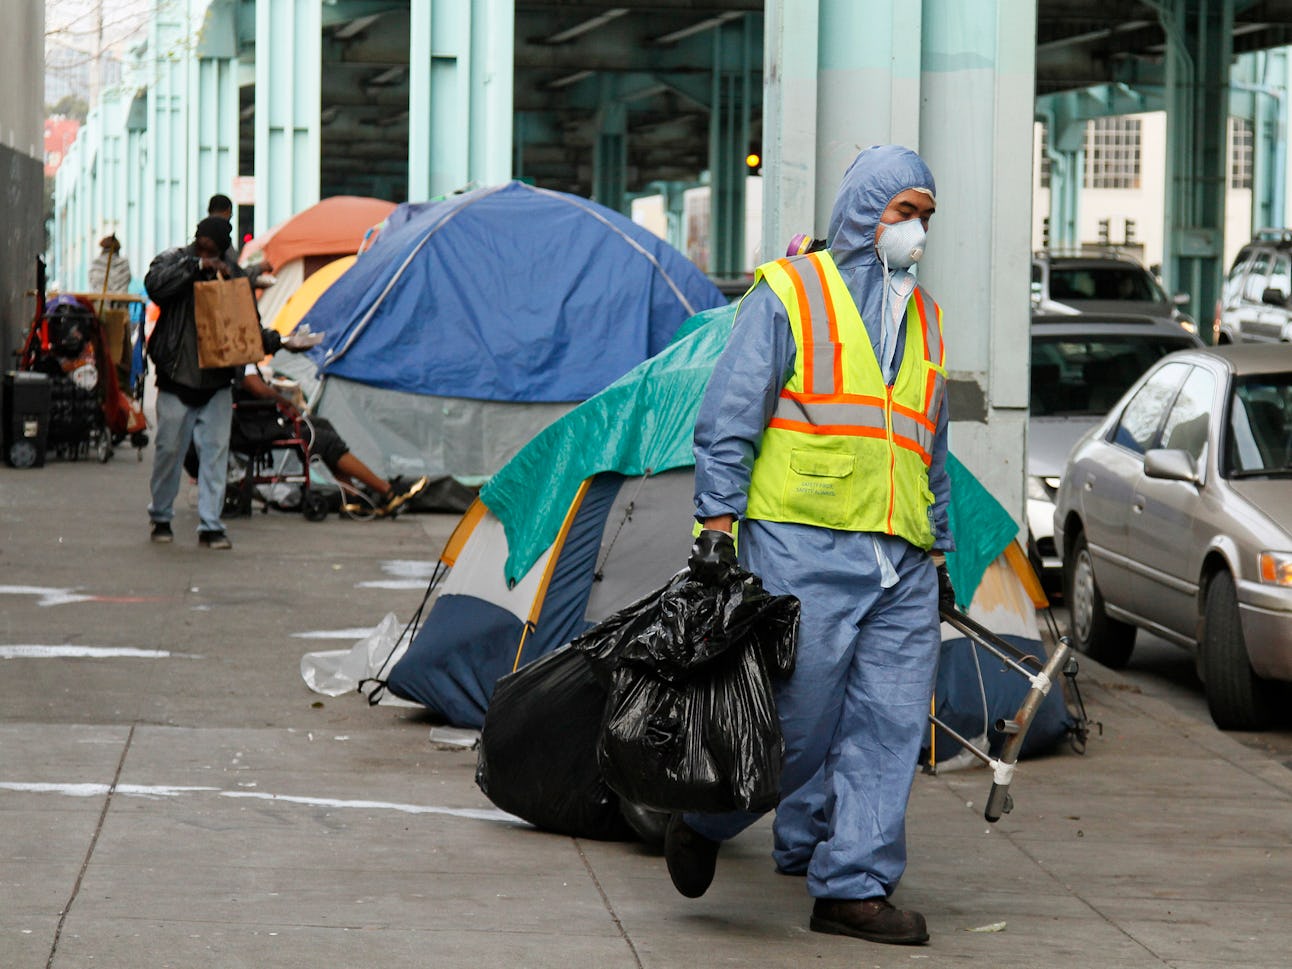 San Francisco just got 100 million to fight homelessness. Can it fix